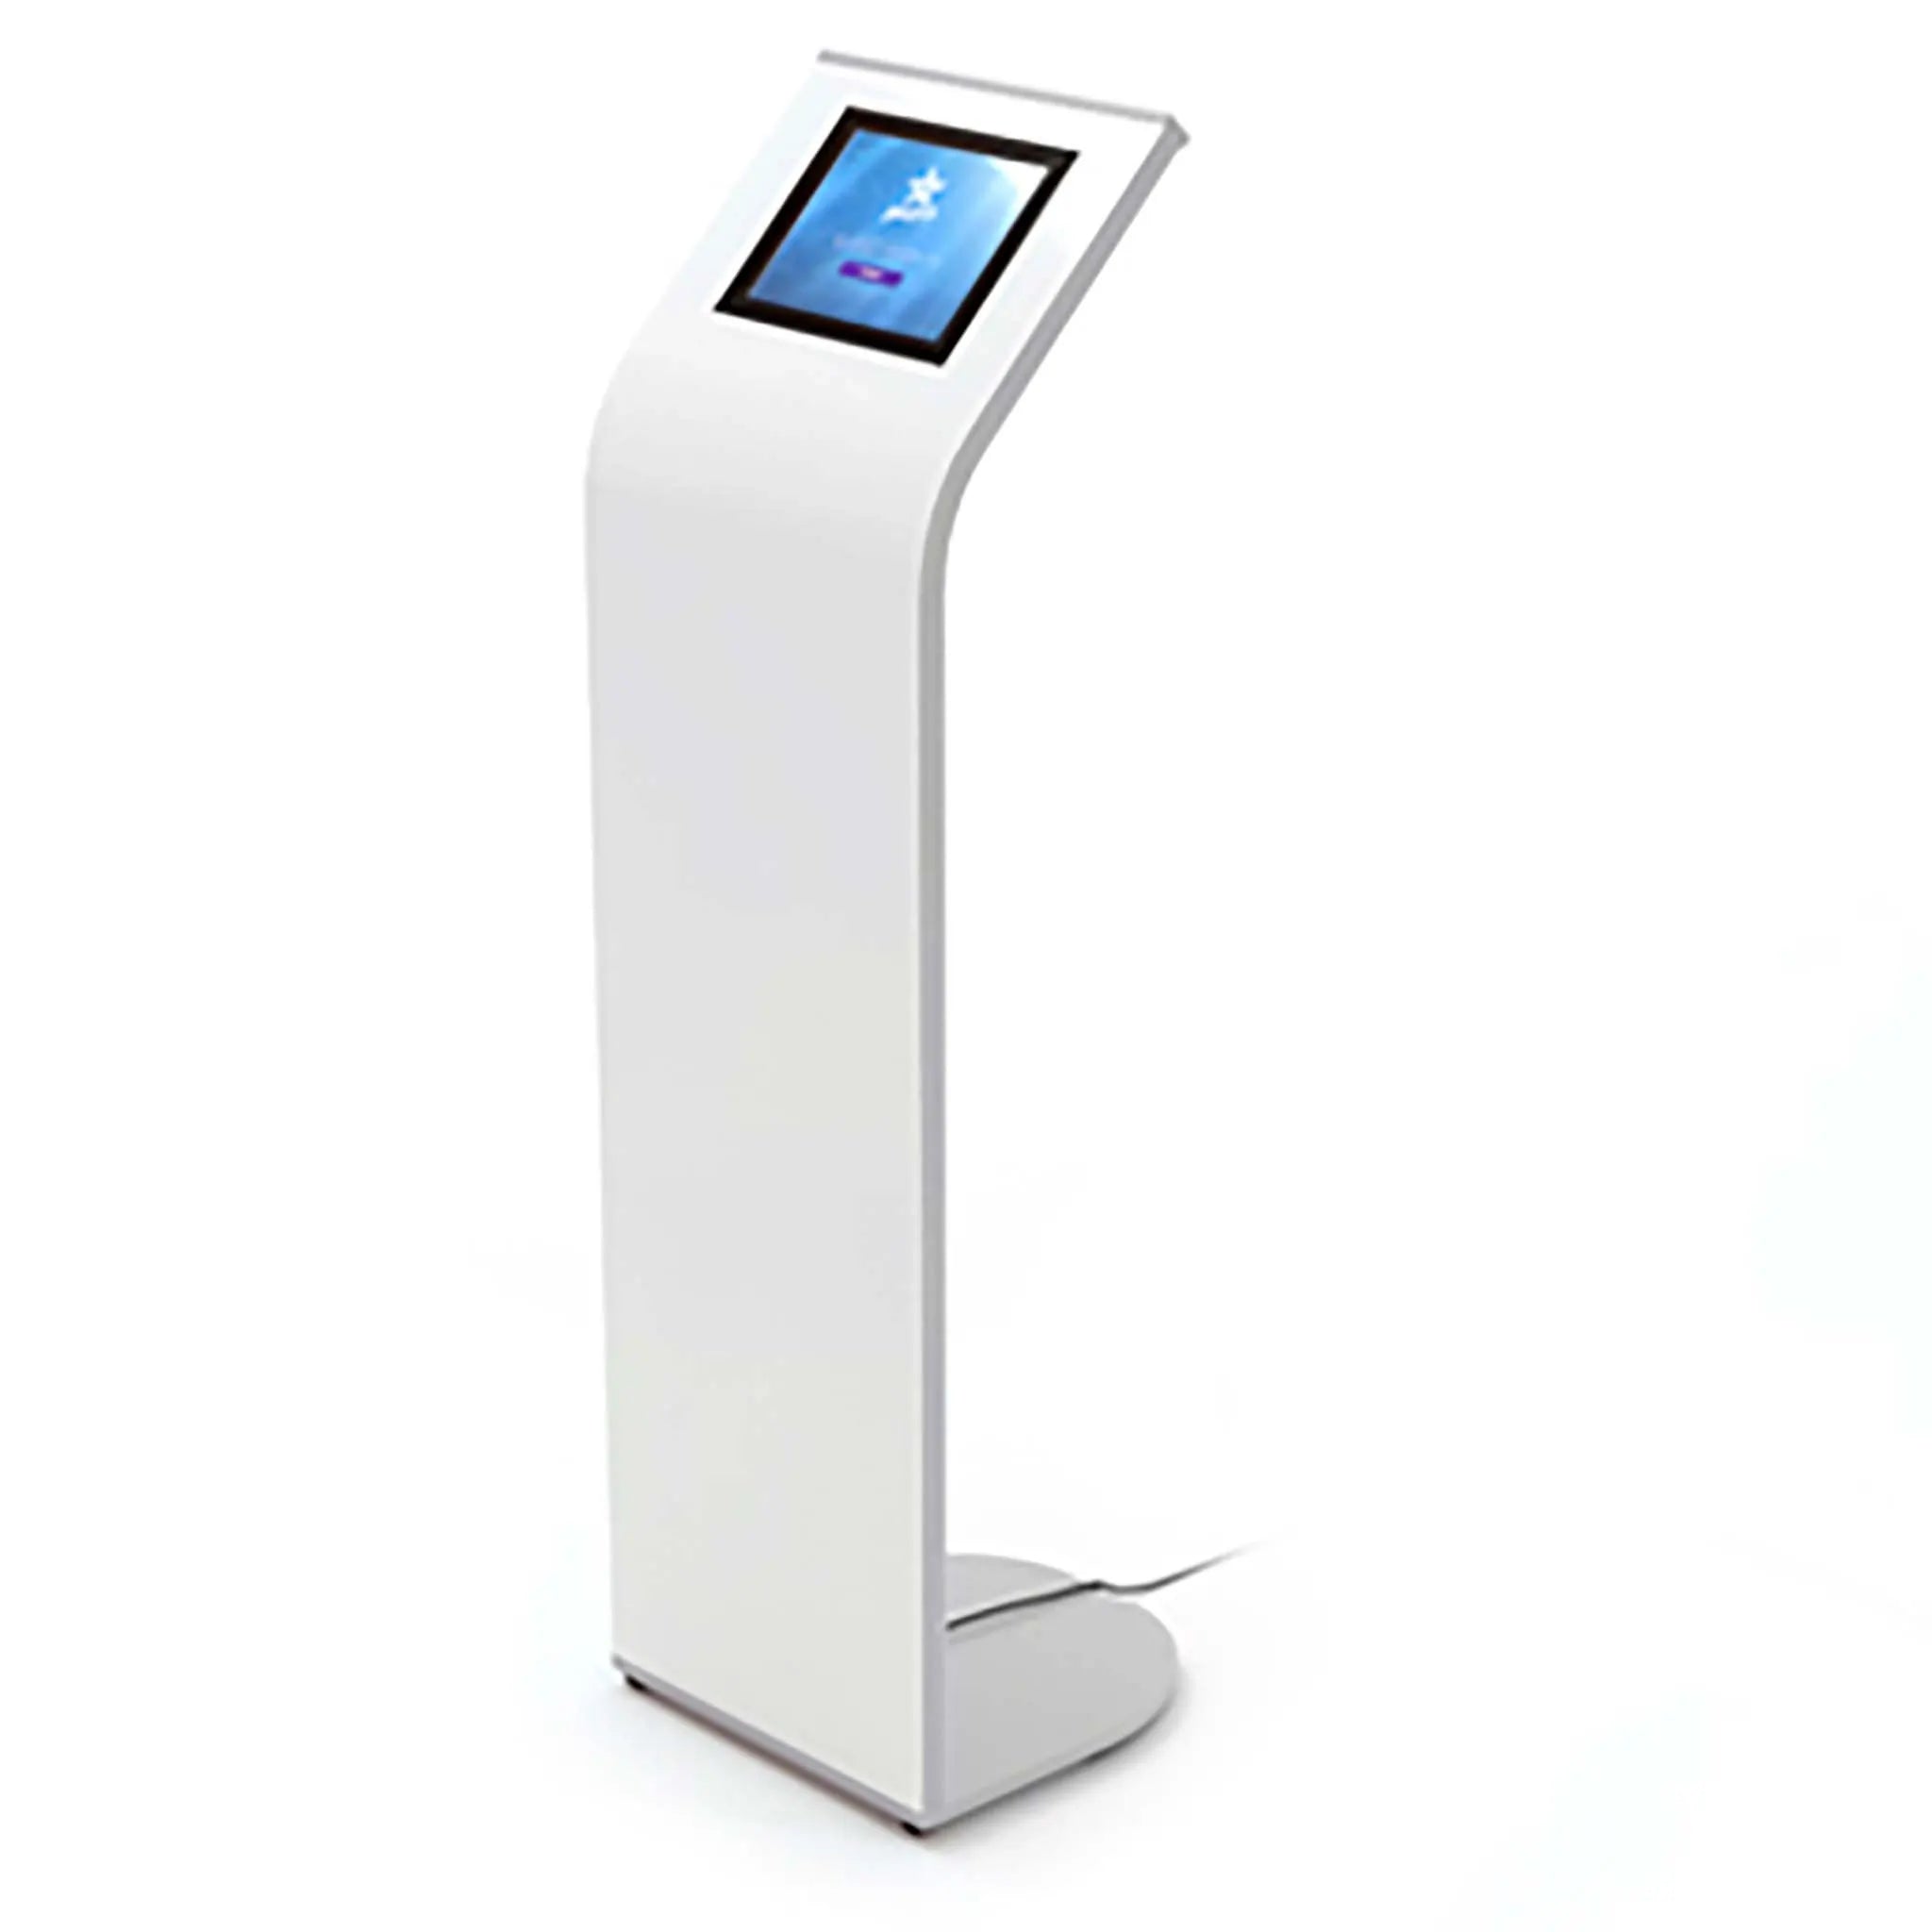 Alur tablet and ipad kiosk stand. Magnetic features allowing for full customization on the whole kiosk front.